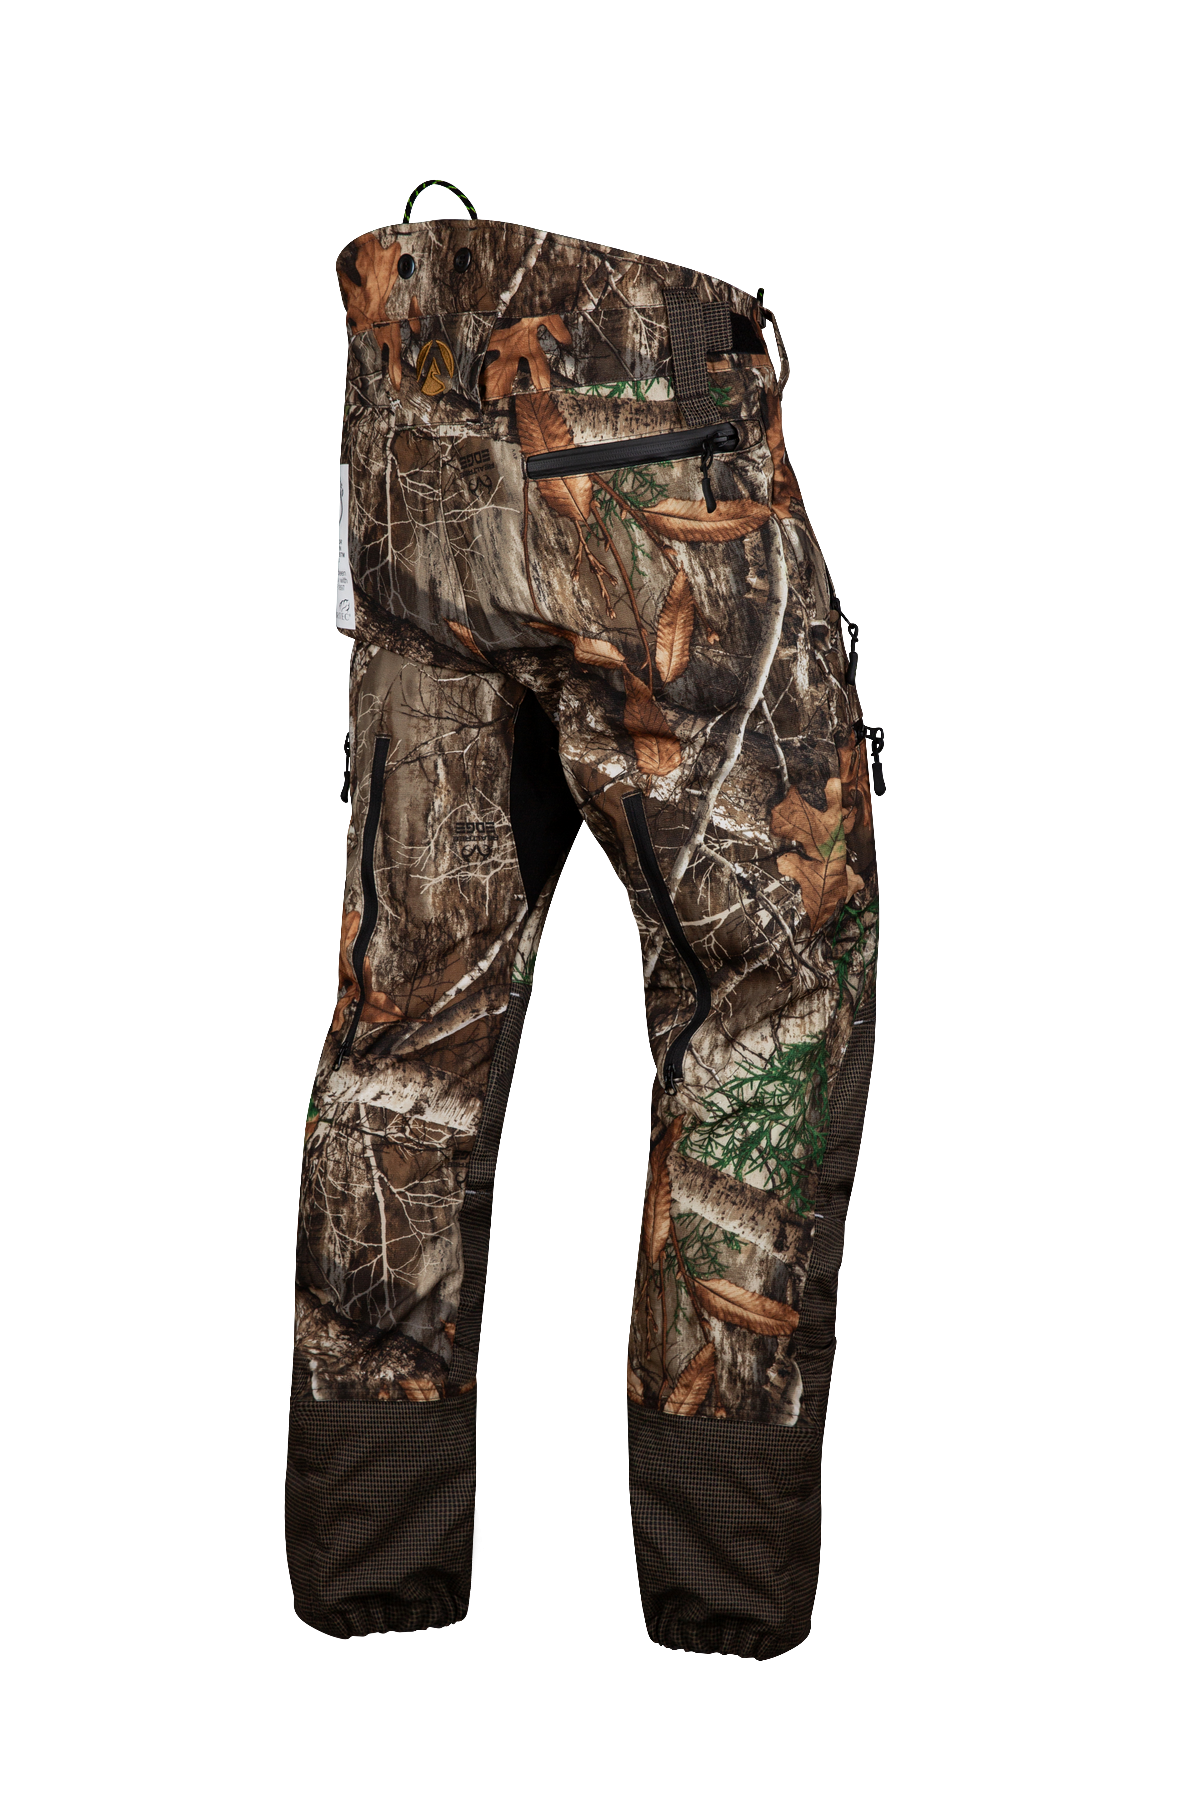 AT4060 UL - Breatheflex Pro Realtree Chainsaw Trousers Design A/Class 1 - Brown